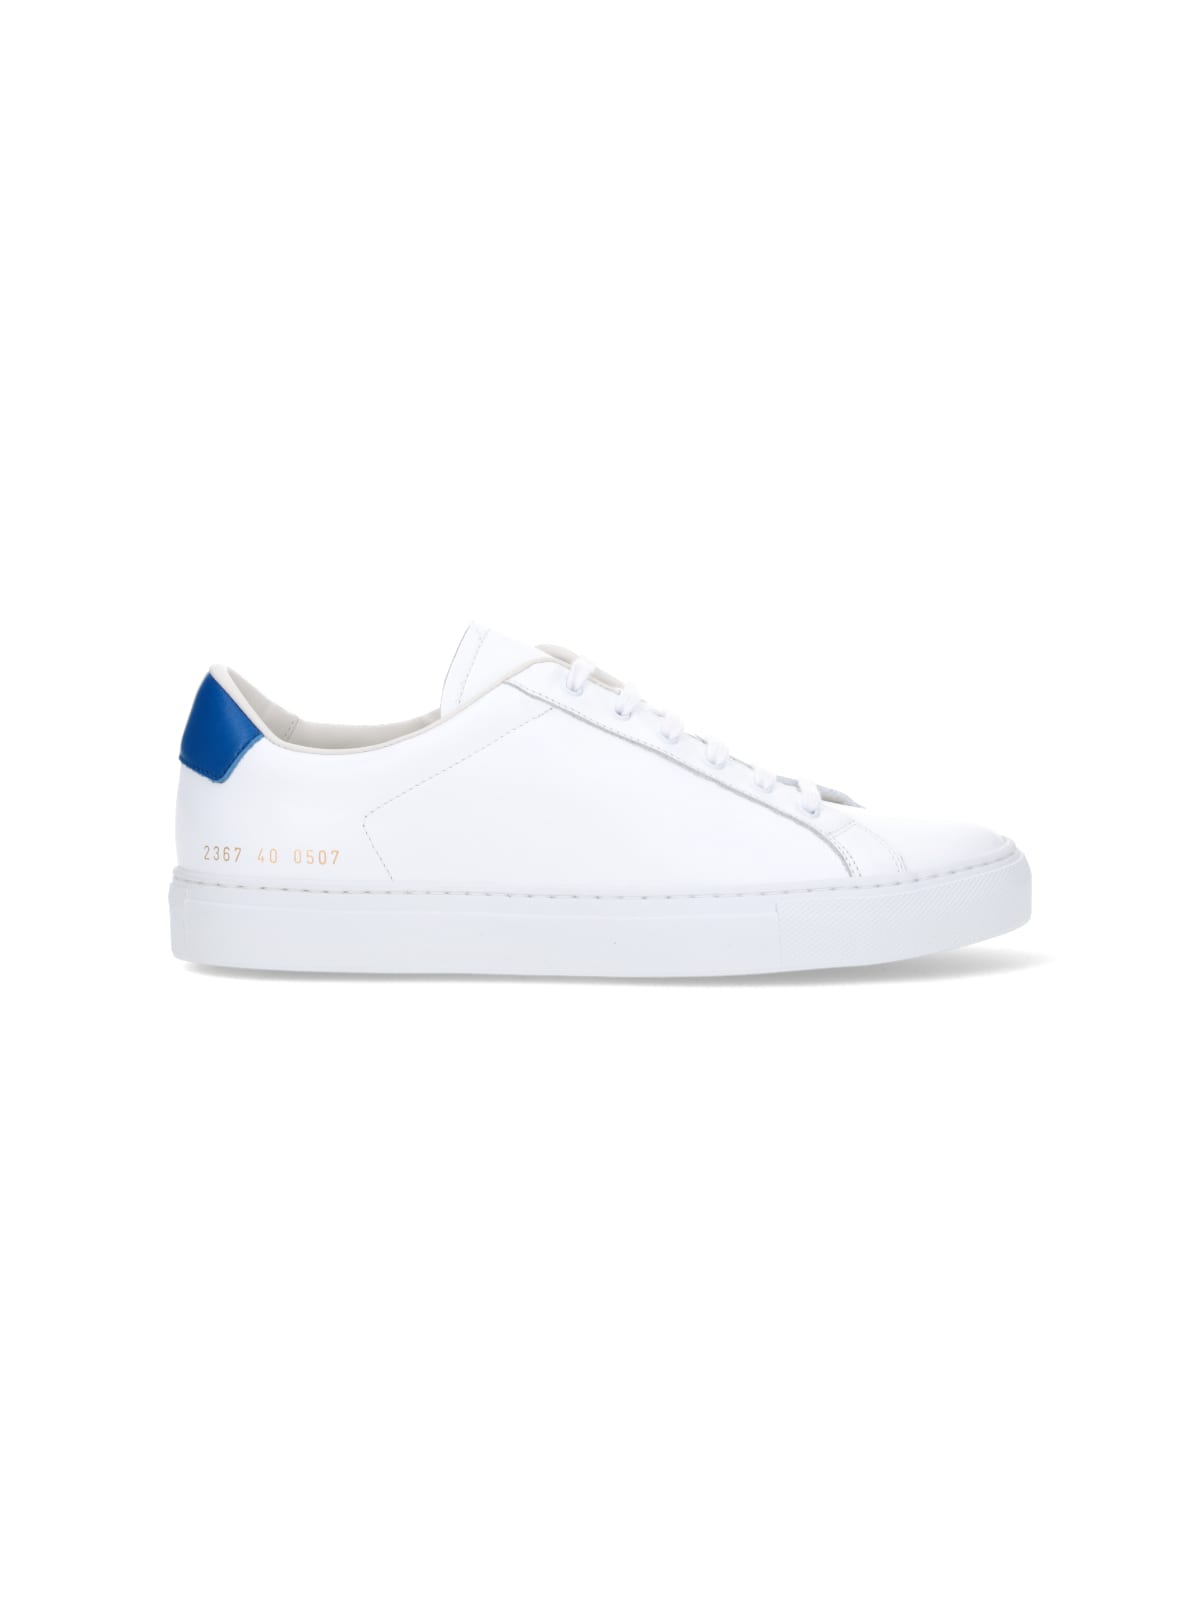 COMMON PROJECTS WHITE LEATHER BACK SNEAKERS